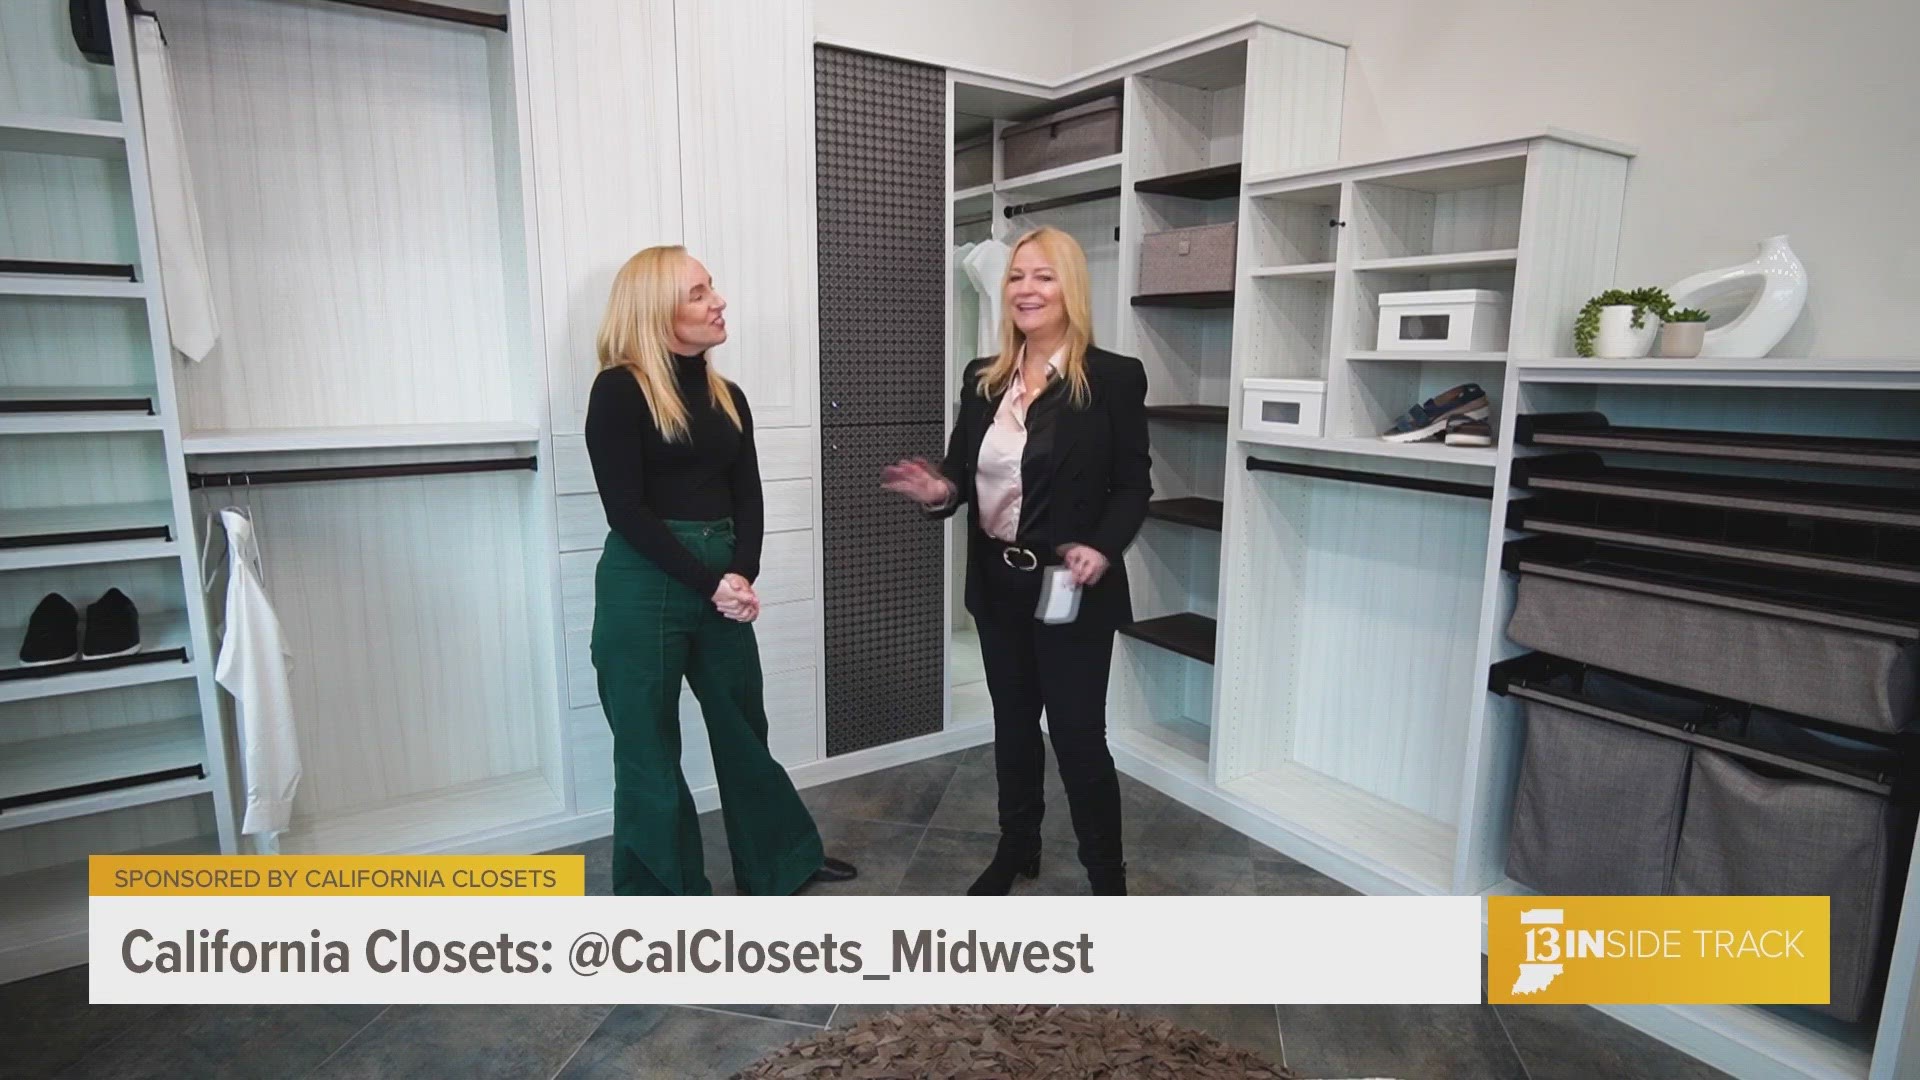 California Closets helps hoosiers stay organized beyond just a closet. Learn how they use a 3D CAD program to help you visualize your options before building.